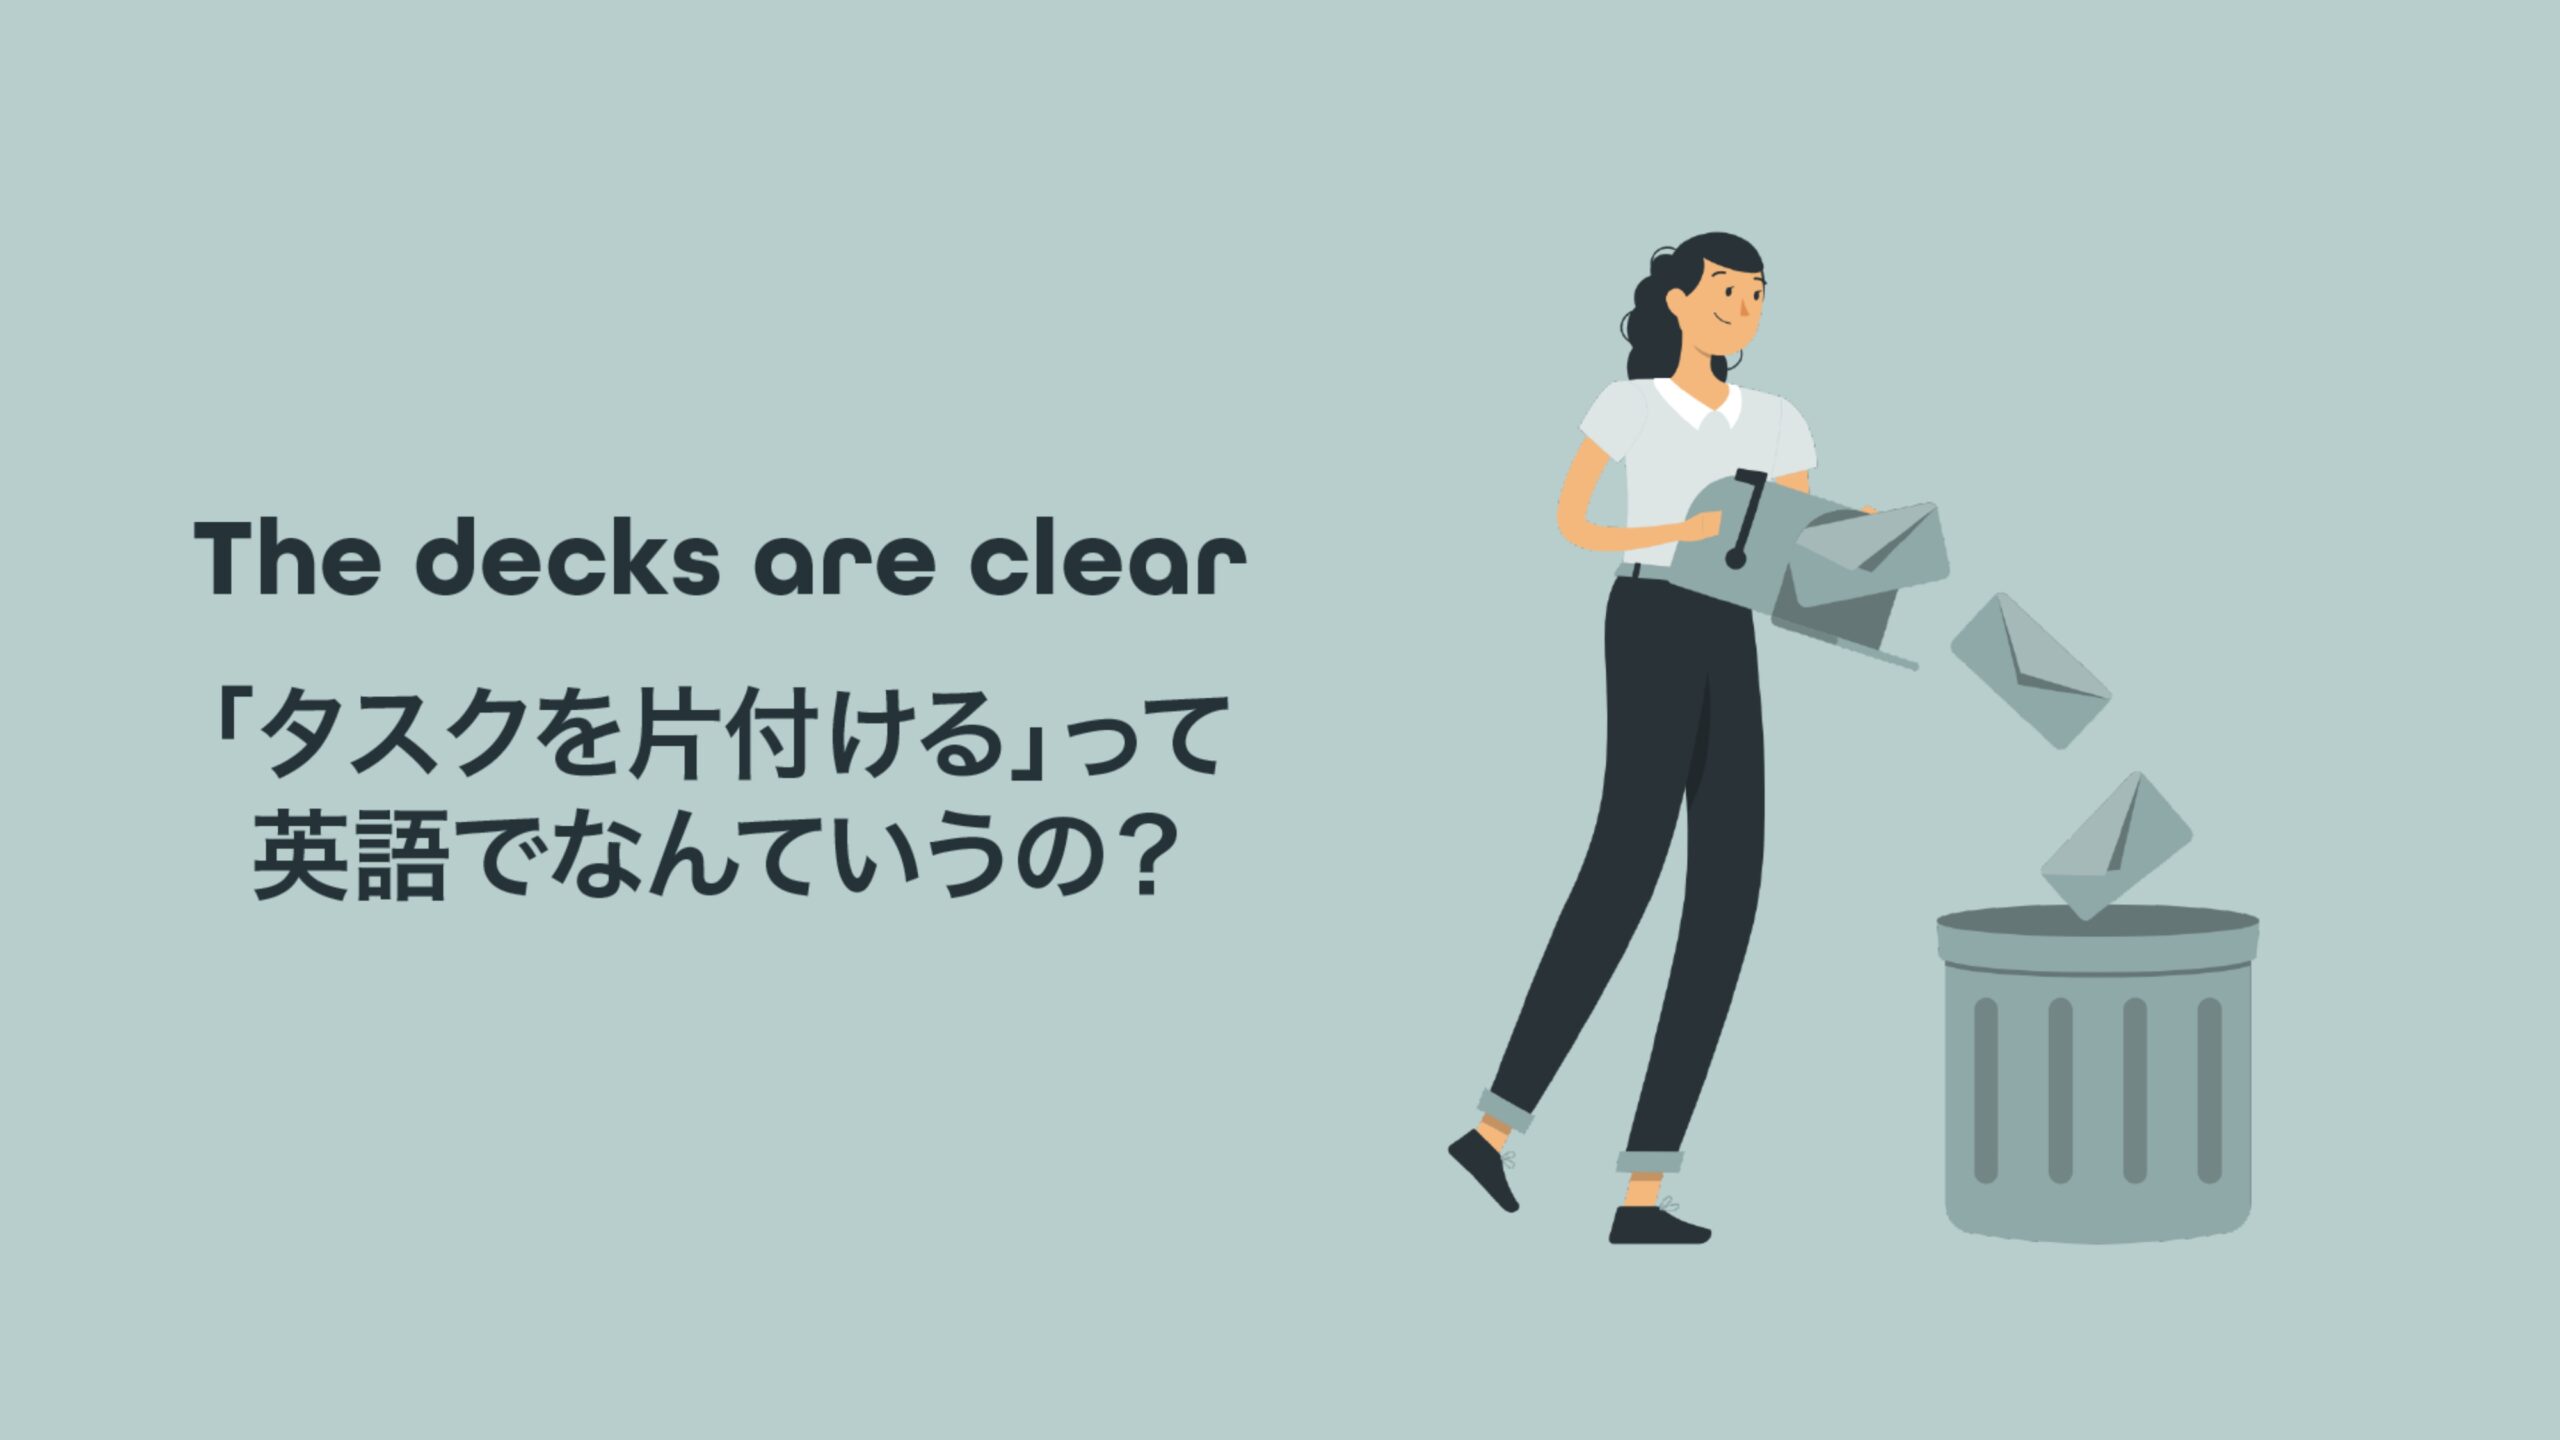 Featured image for “The decks are clean.  「タスクを片付ける」って英語でなんていうの？”